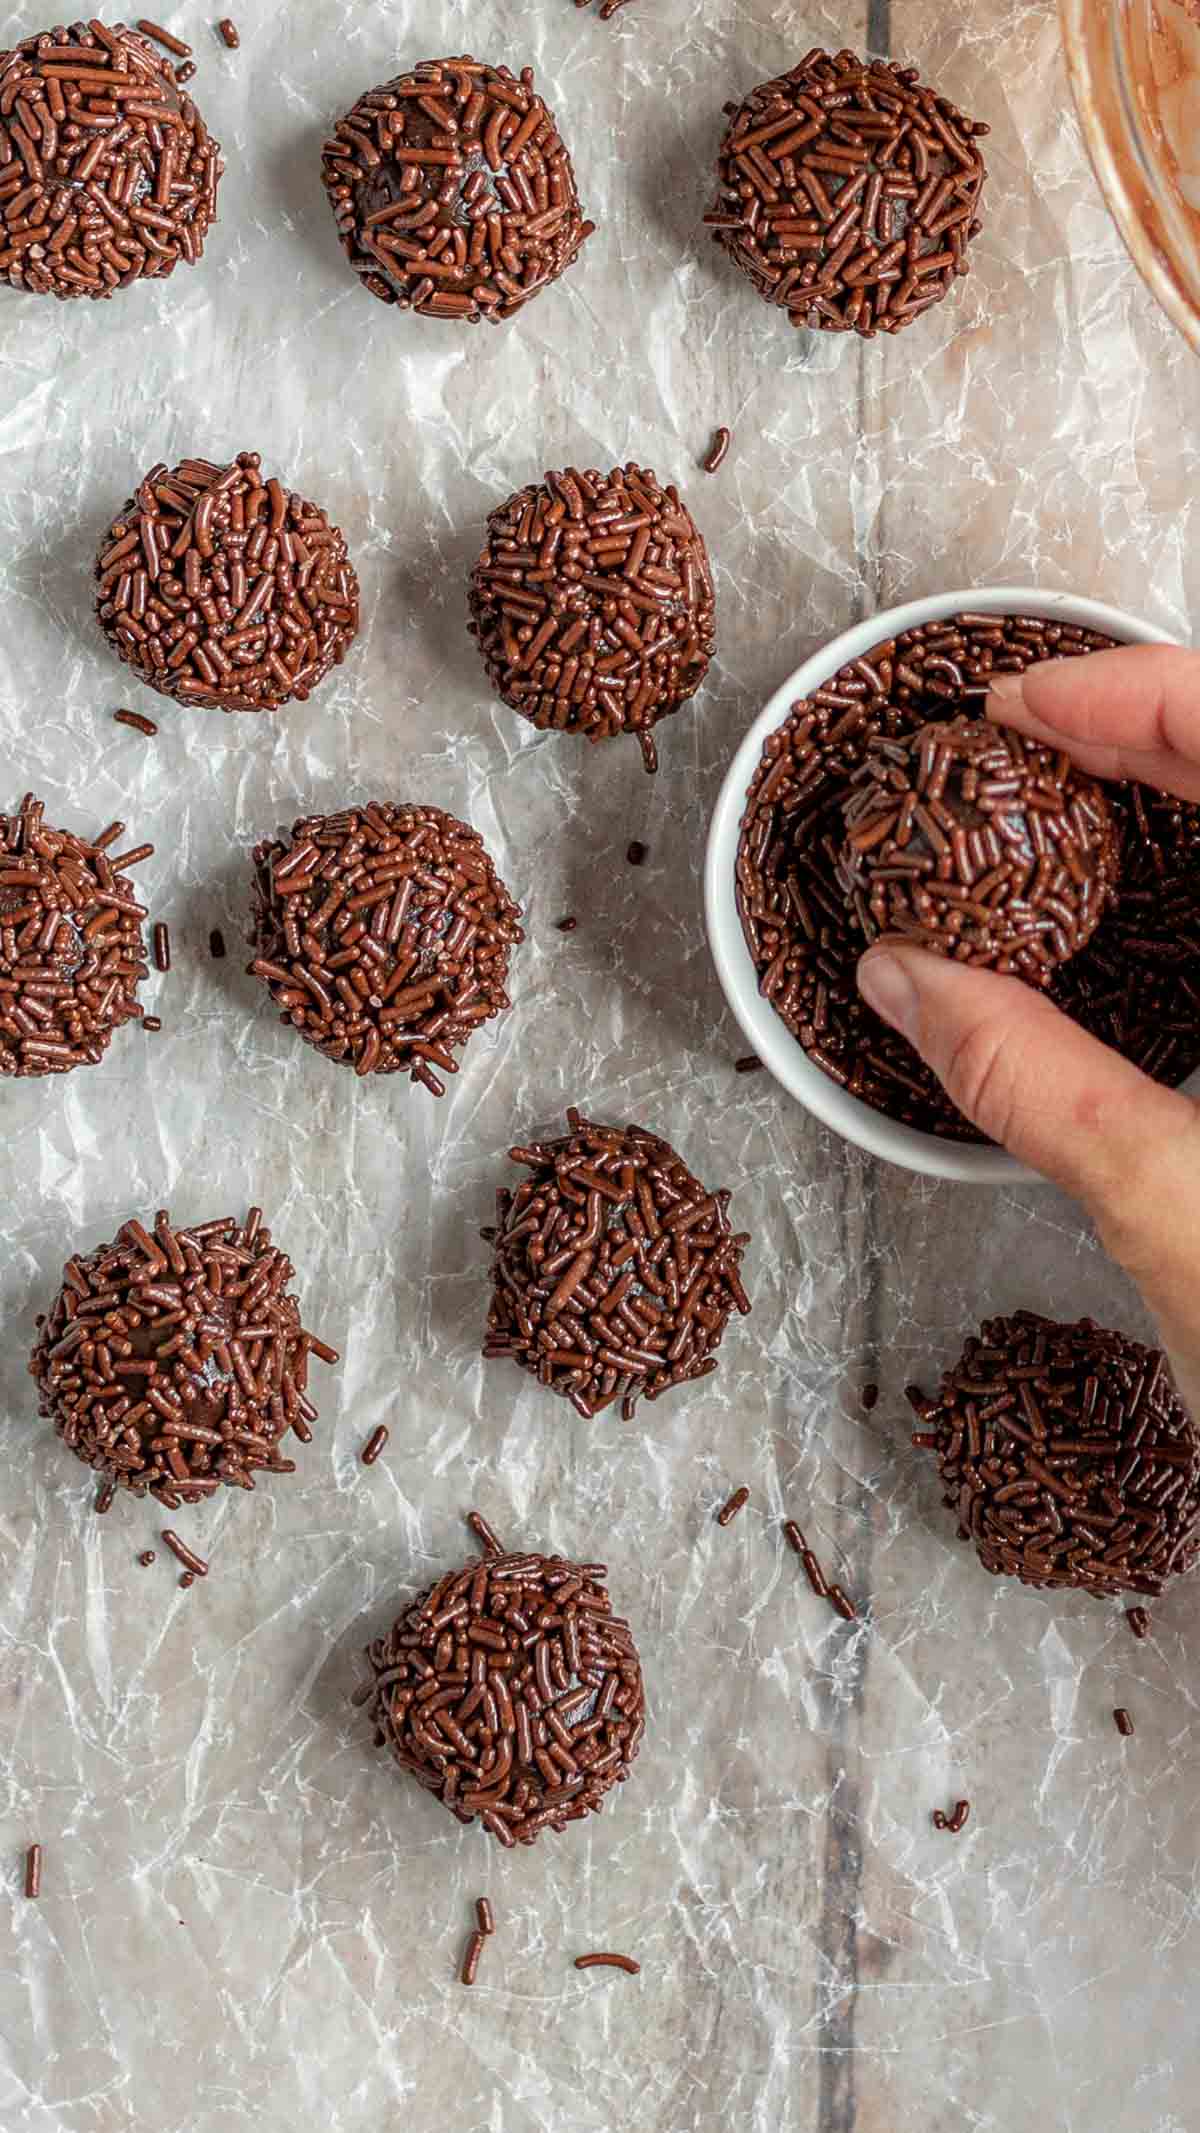 Brazilian Brigadeiros Candies balls with hand dipping in chocolate sprinkles